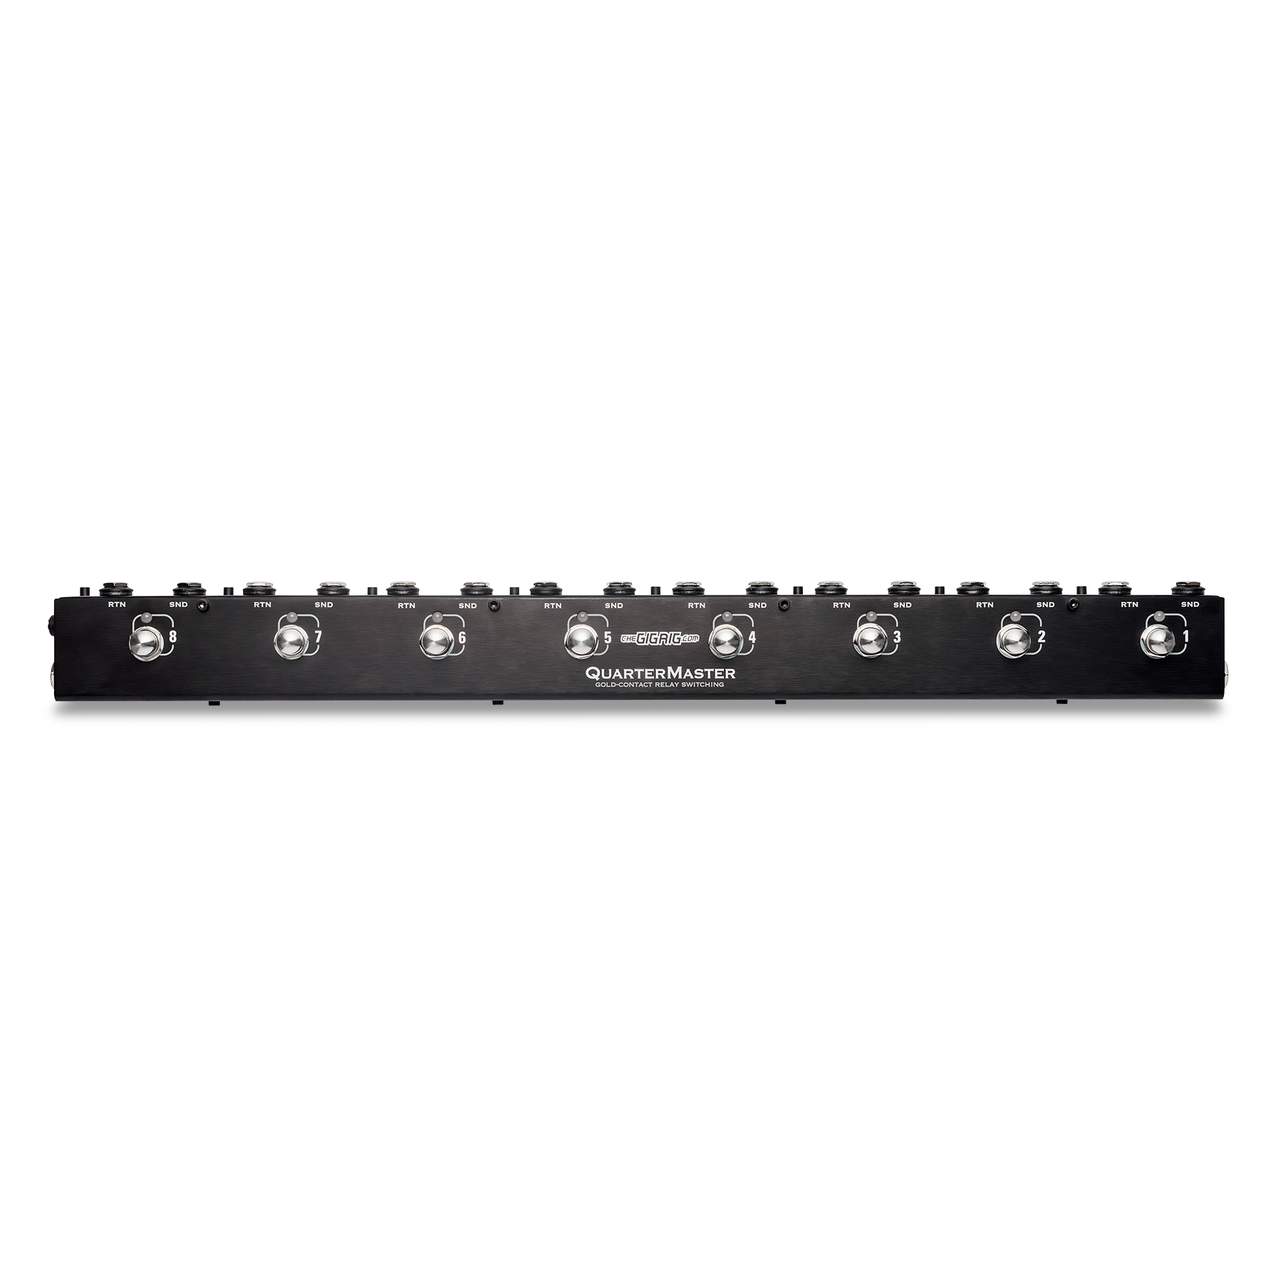 The GigRig Quartermaster QMX8 Loop Switcher for Guitar Effects Pedals